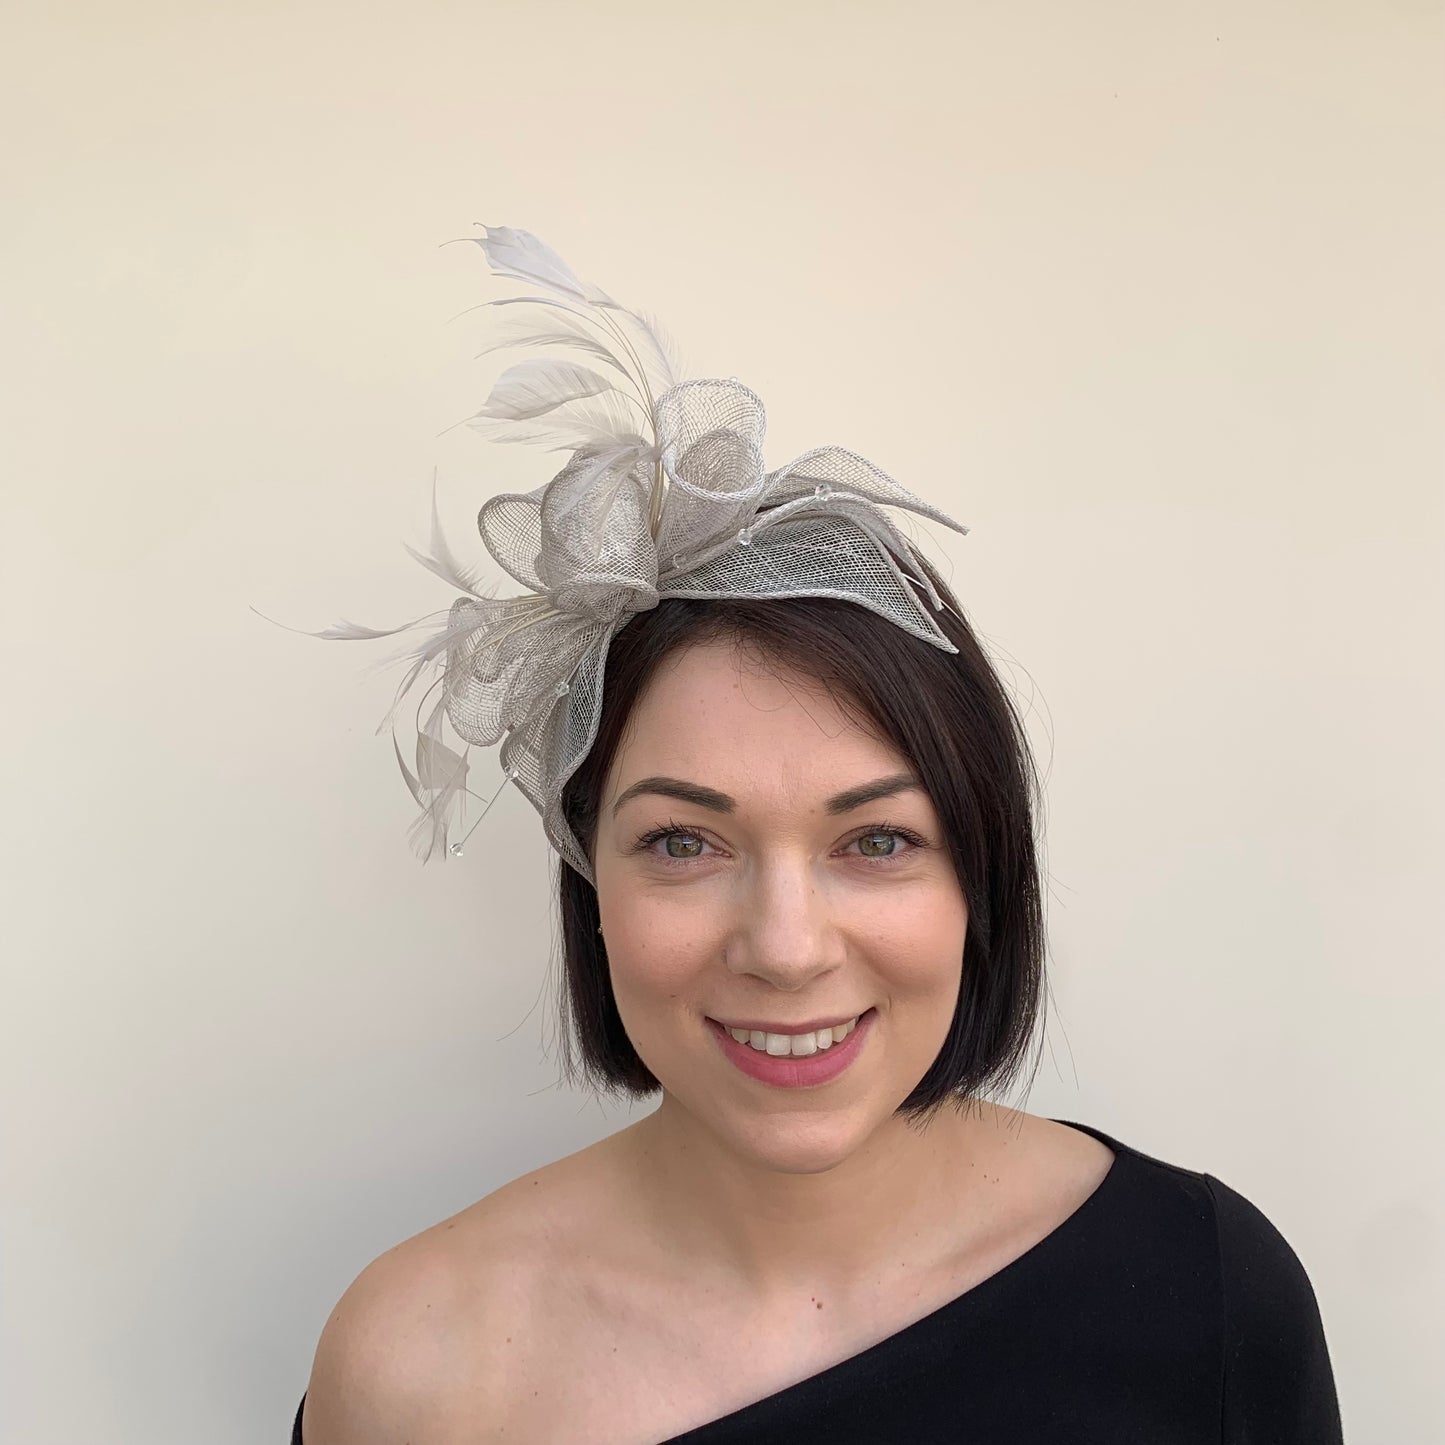 J Bees JB23/318 Fascinator in Greys and Silvers